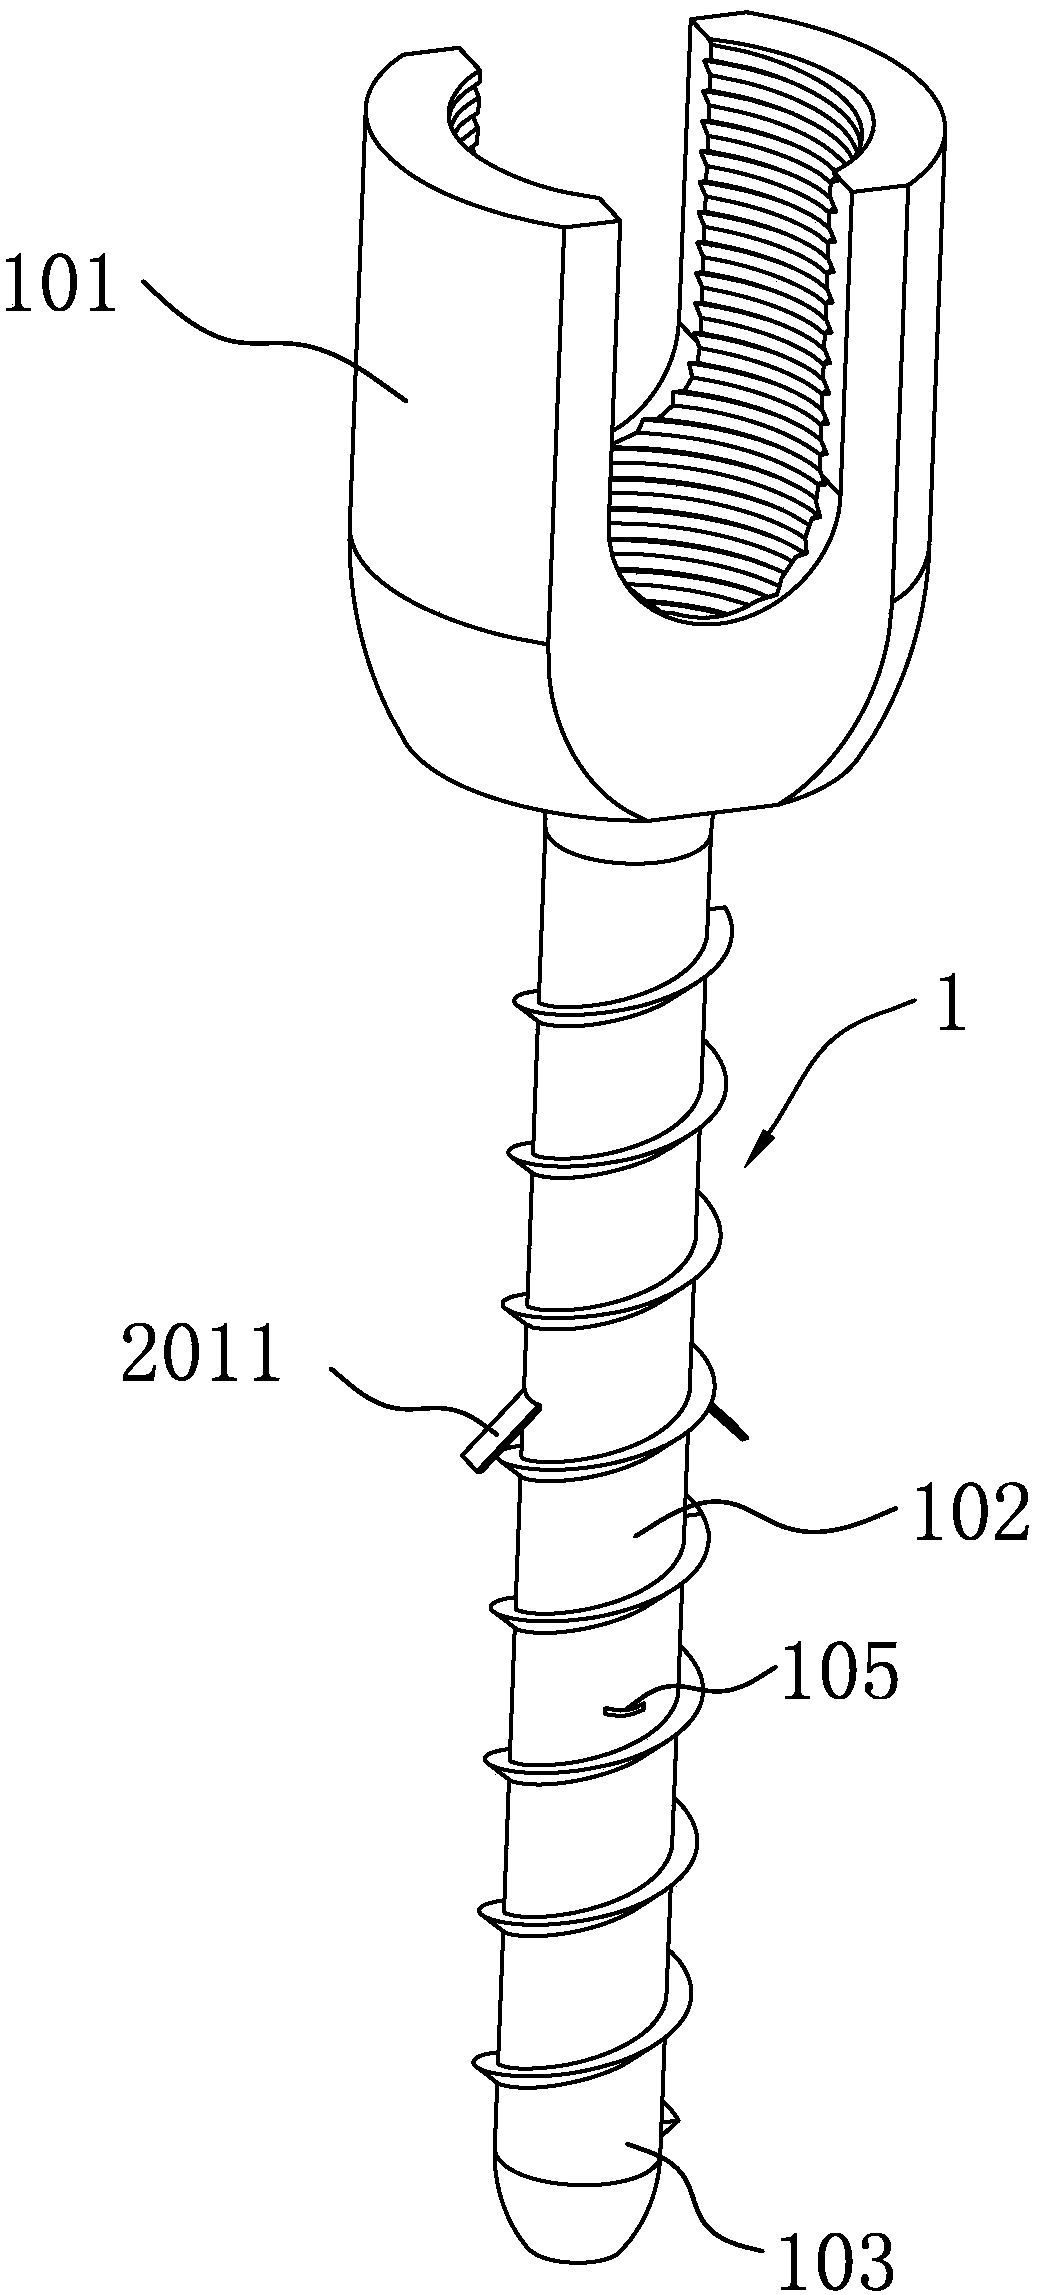 Bone bolt with reinforced anchoring sheets